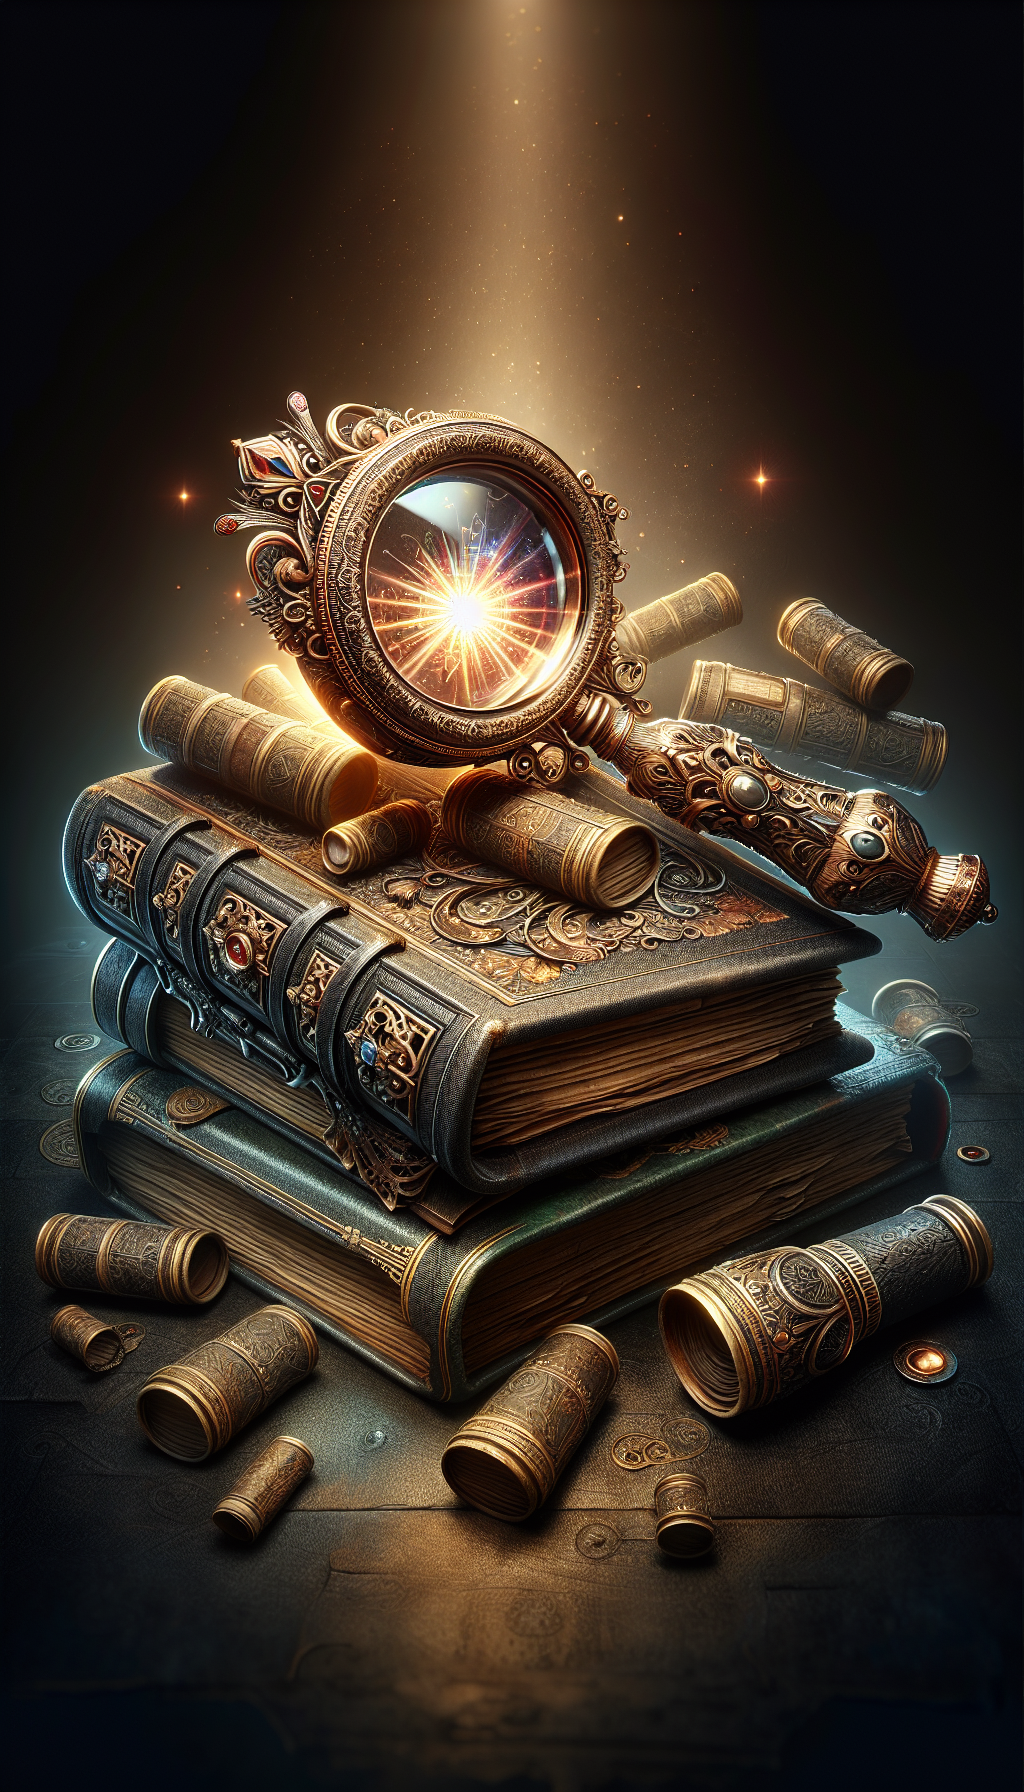 An intricately detailed magnifying glass hovers over a stack of antique books, with a shimmering glow emanating from a first edition on top, signifying its rarity and value. The book's spine and cover are styled with Victorian flourishes, while the magnifying glass combines a steampunk aesthetic, symbolizing the fusion of history and the hunt for precious literary treasures.